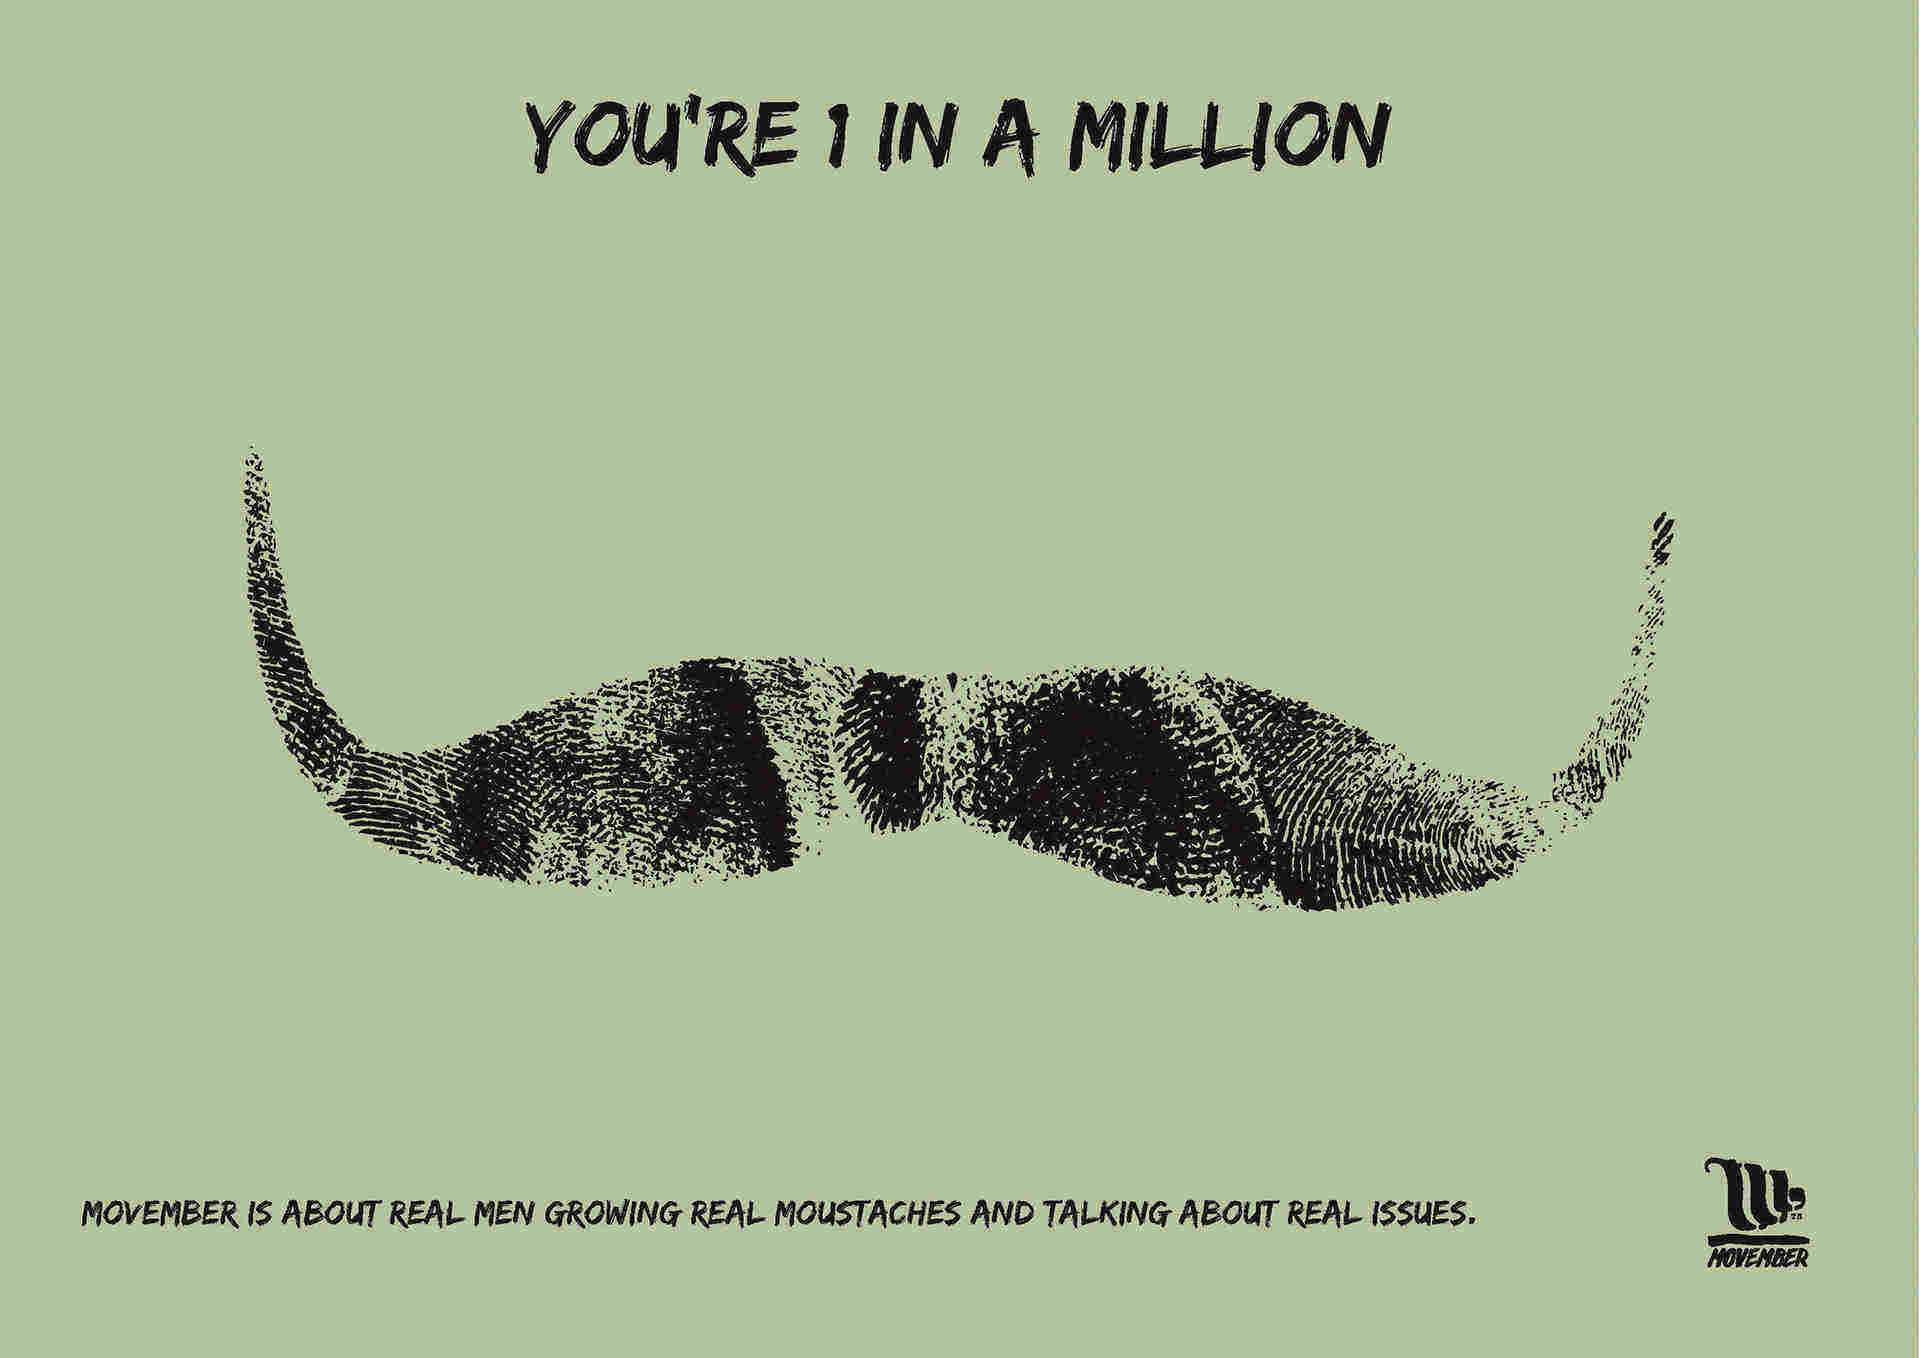 You're 1 in a million - Movember Campaign - James Ring.